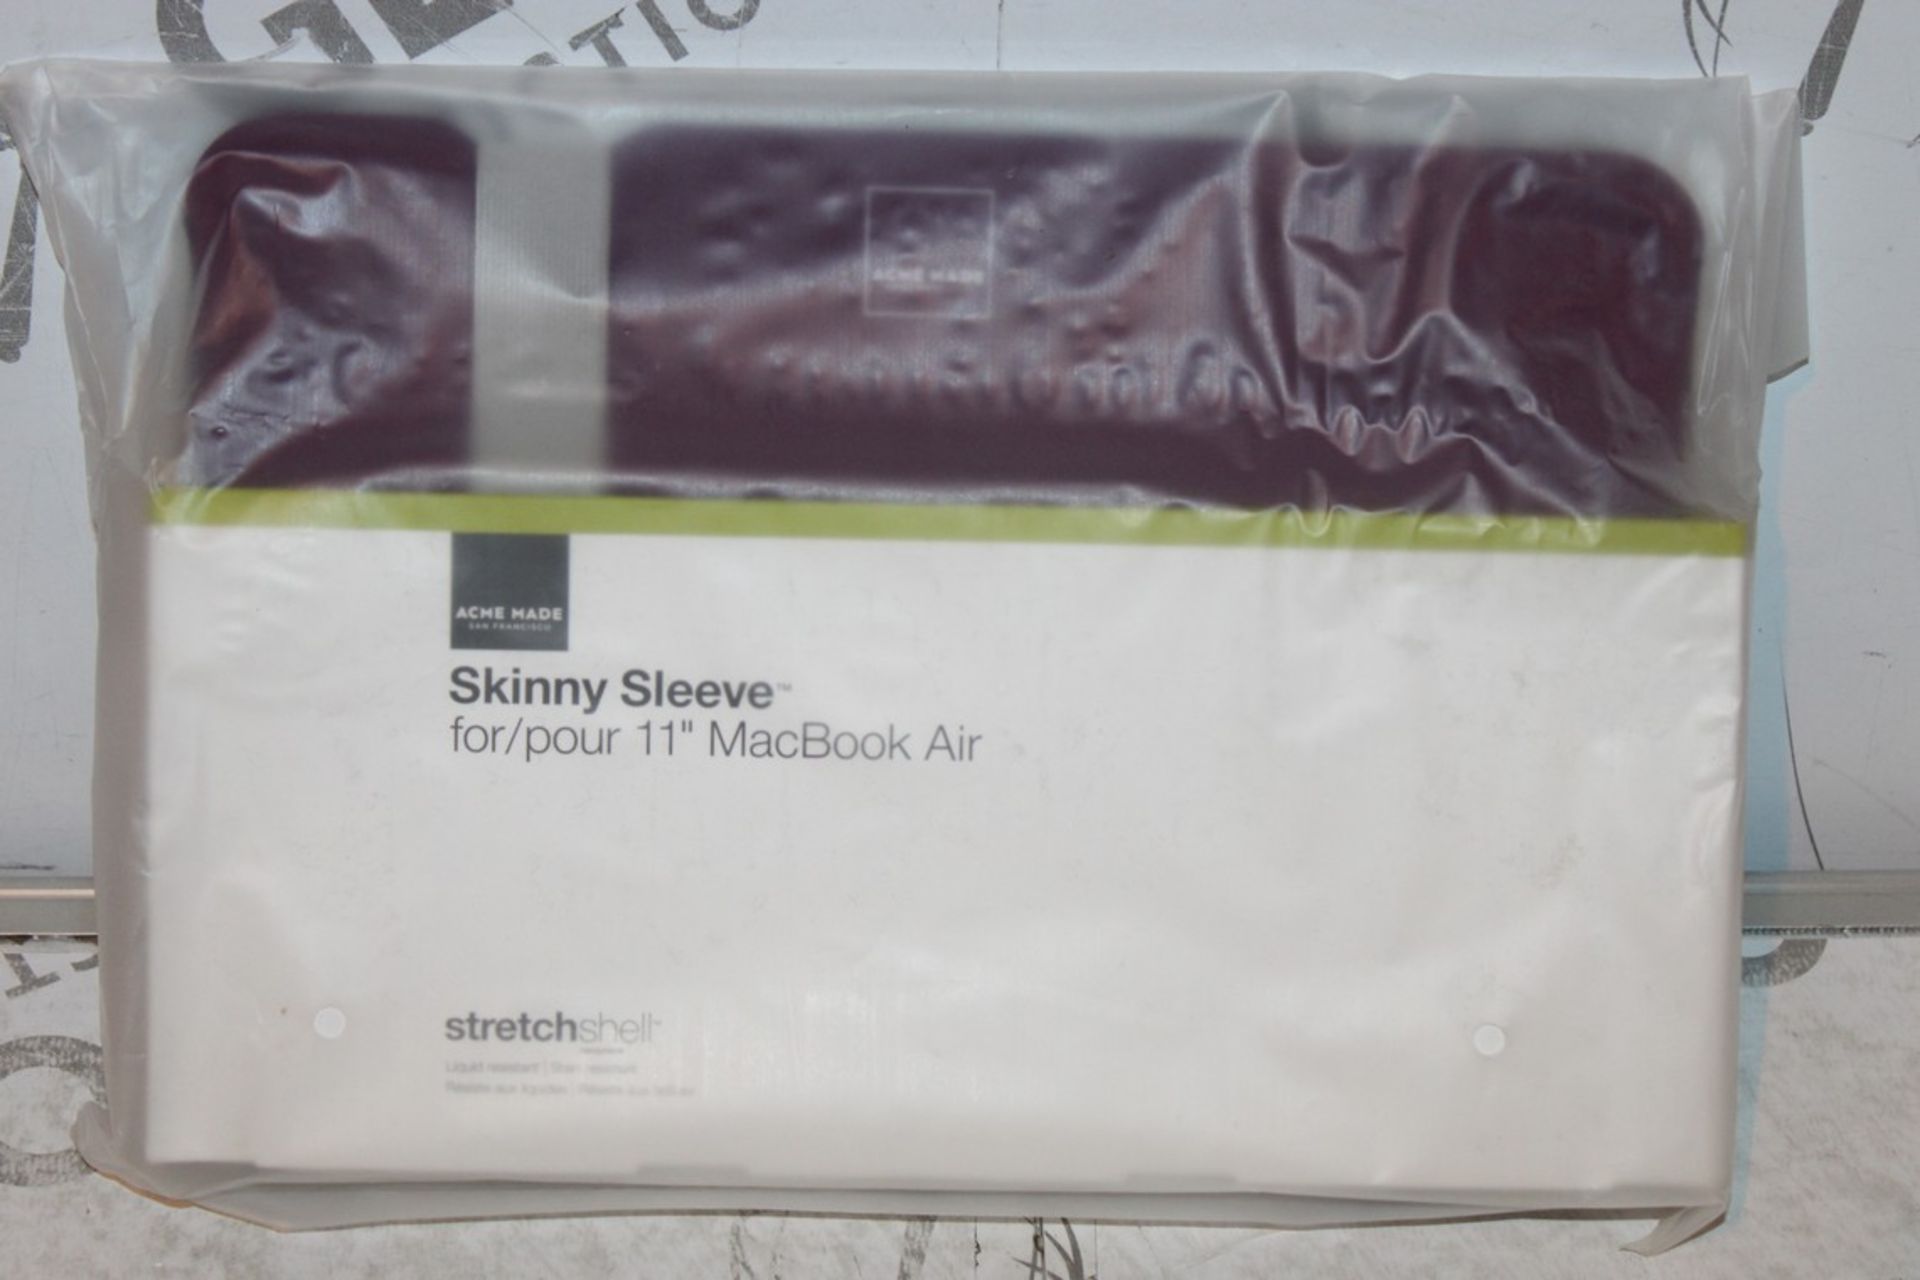 5 Boxed Acme made Skinny Sleeves for 11in MacBook Air in Purple, Combined RRP£100.00